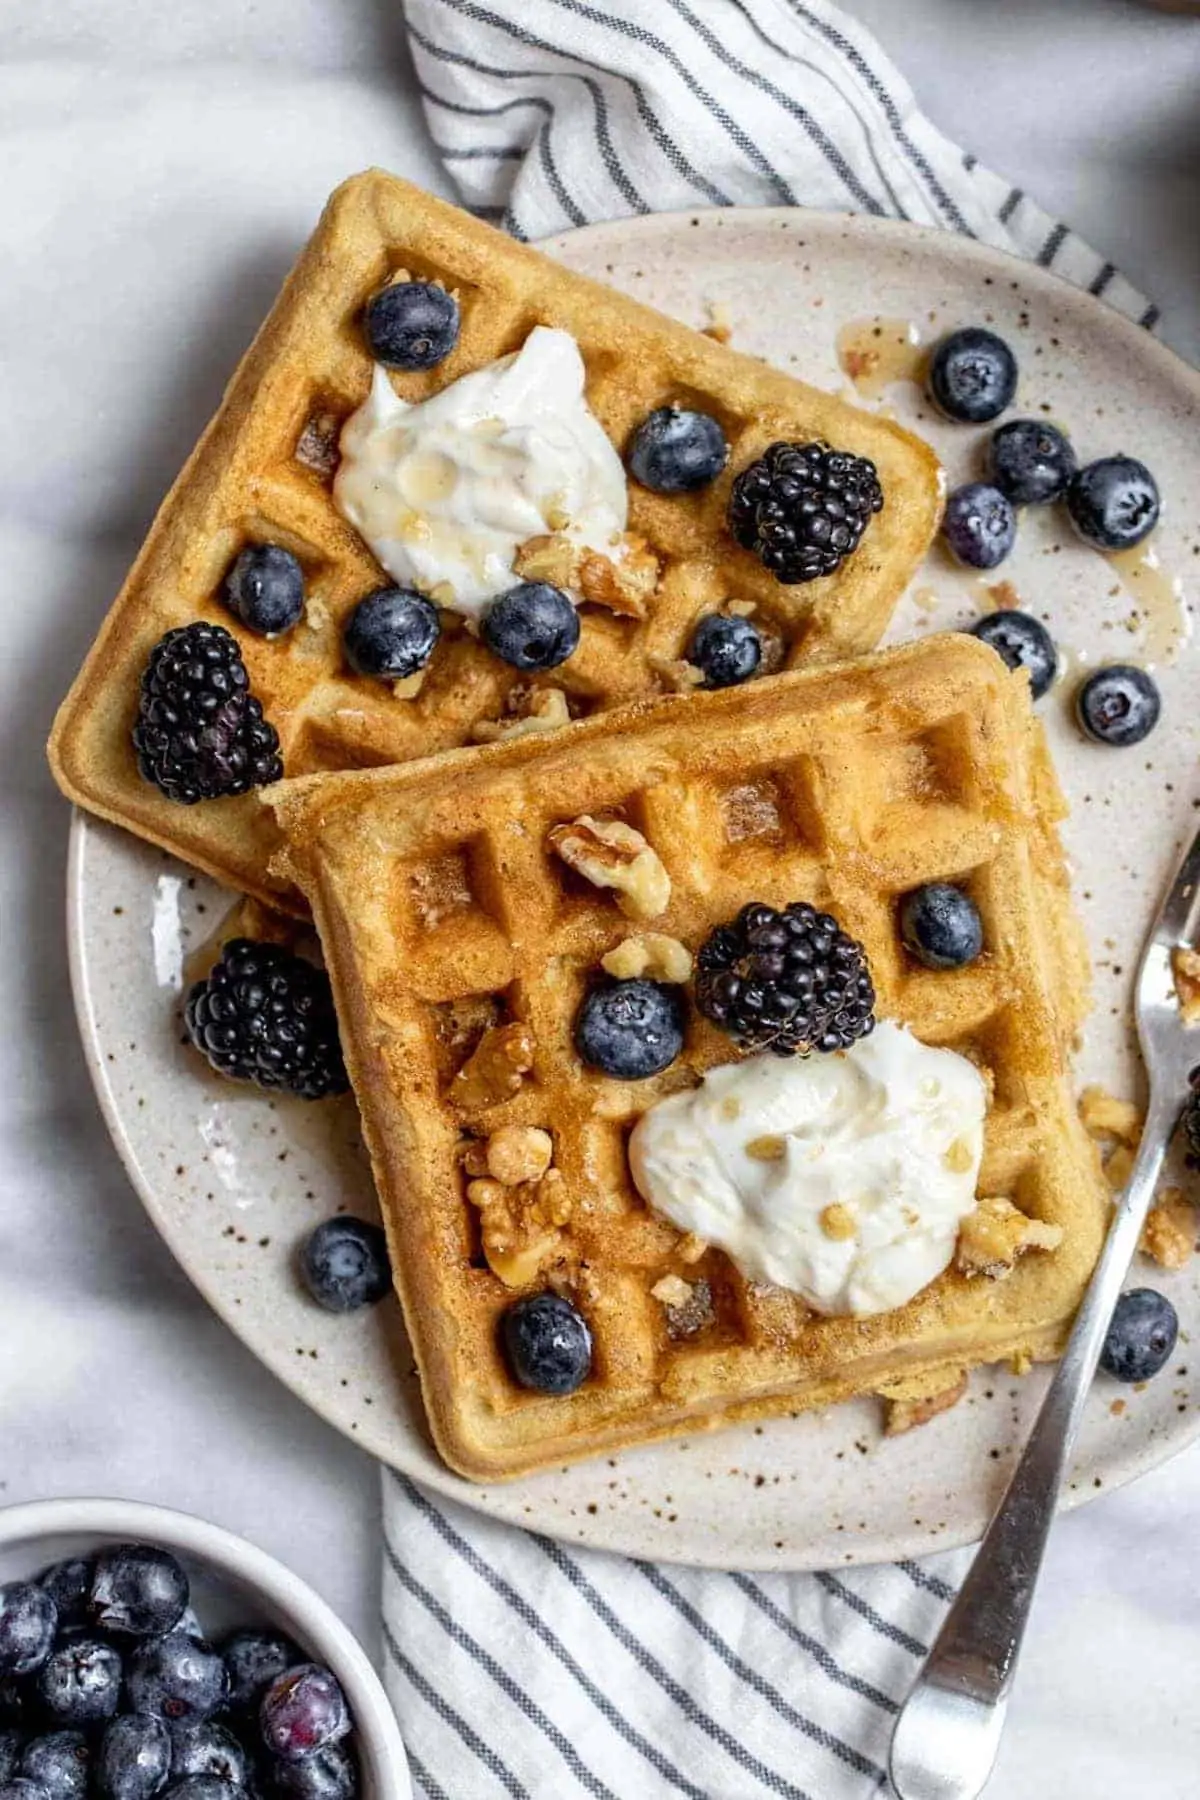 Two almond flour waffles on a plate with yogurt and berries on top.